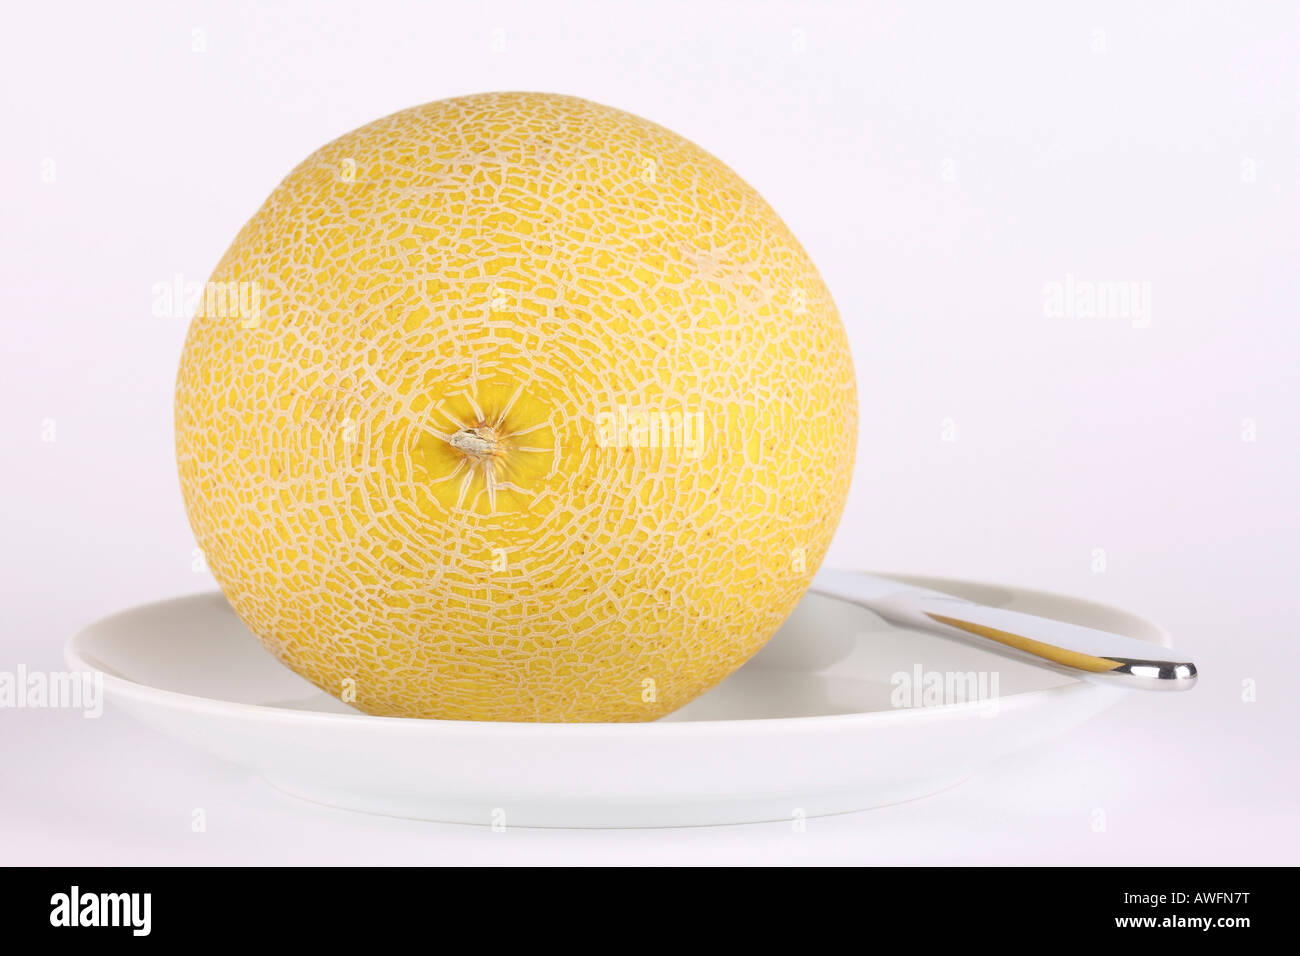 Melon on a plate with cutlery Stock Photo